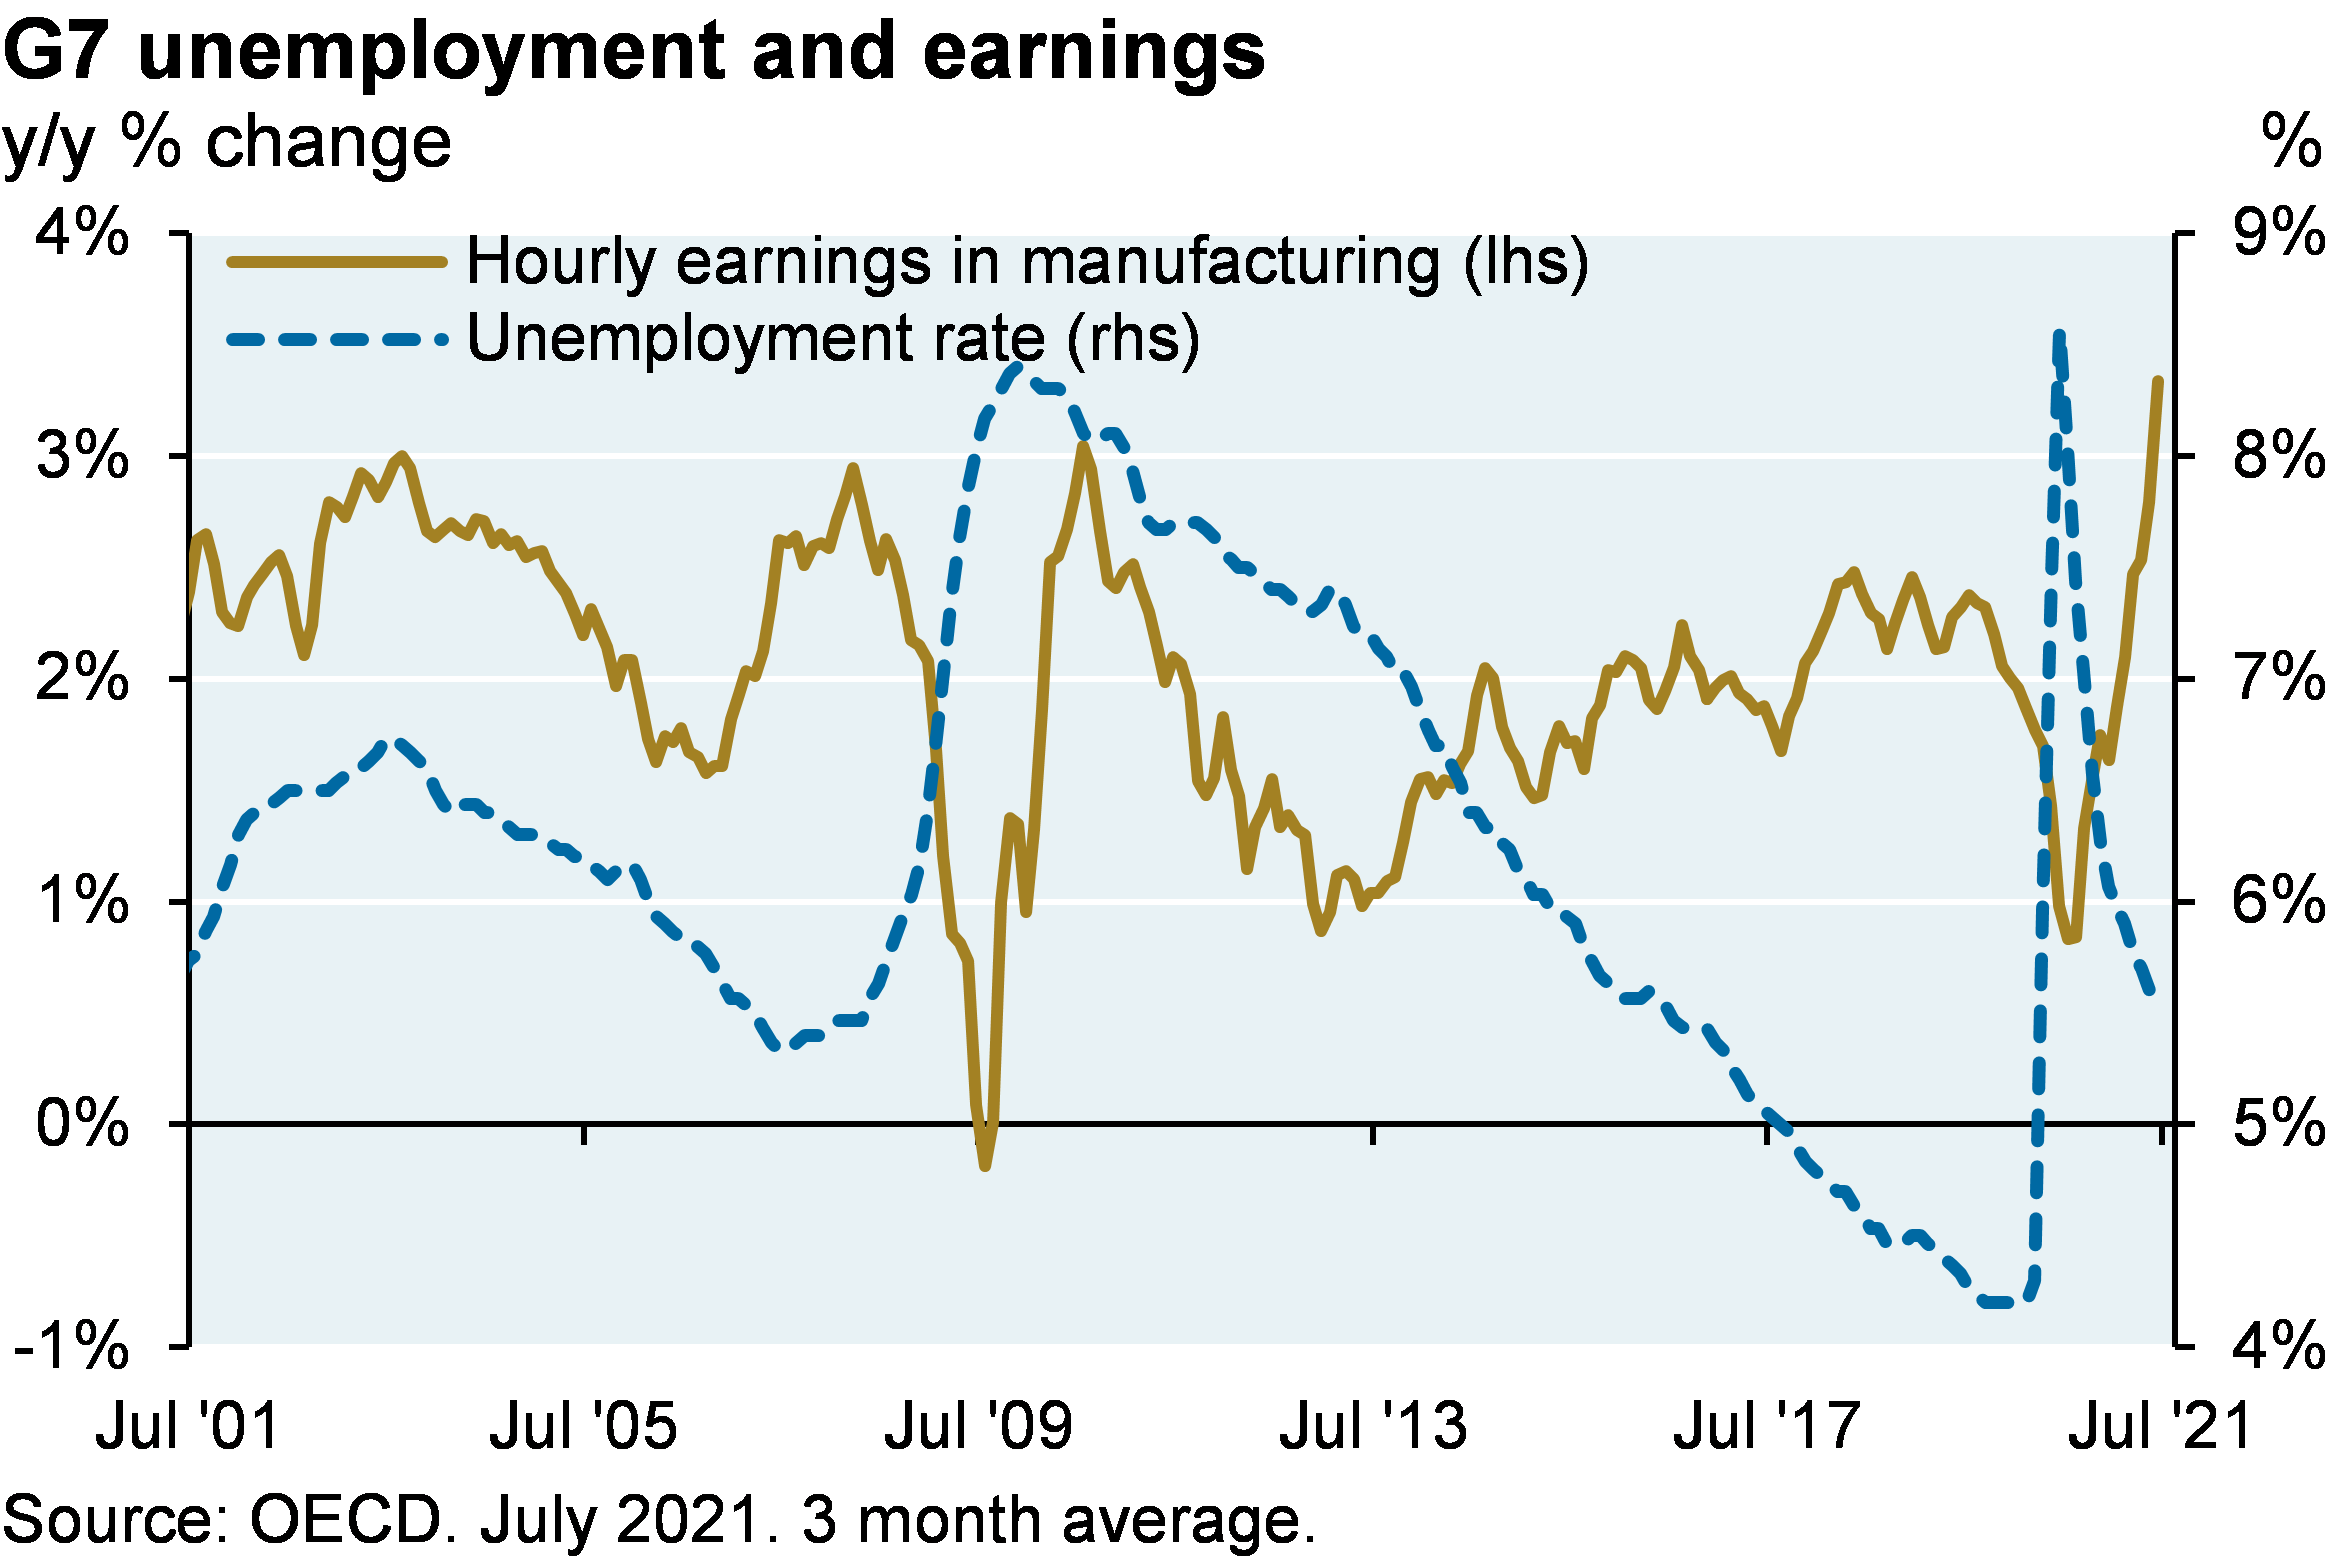 G7 unemployment and earnings